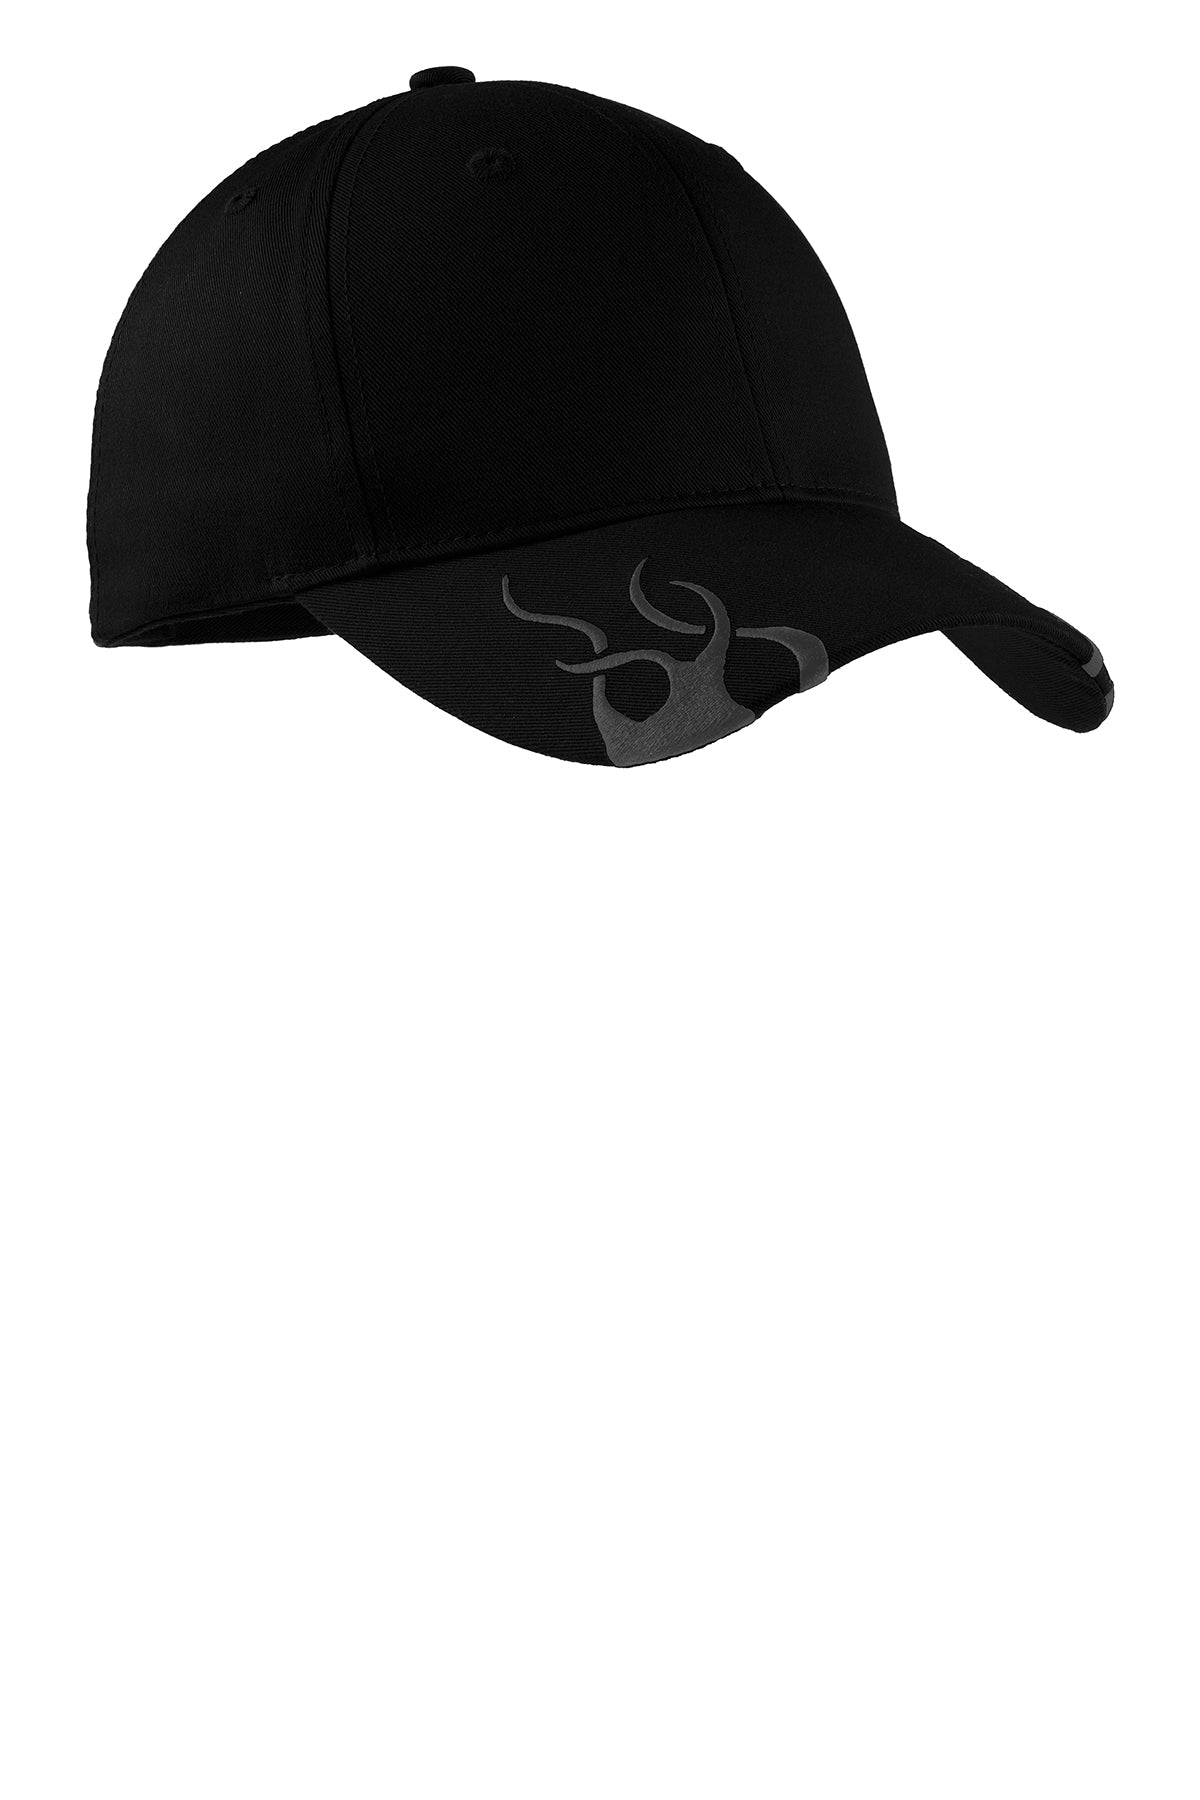 Port Authority Racing Cap with Flames C857 Black/Charcoal